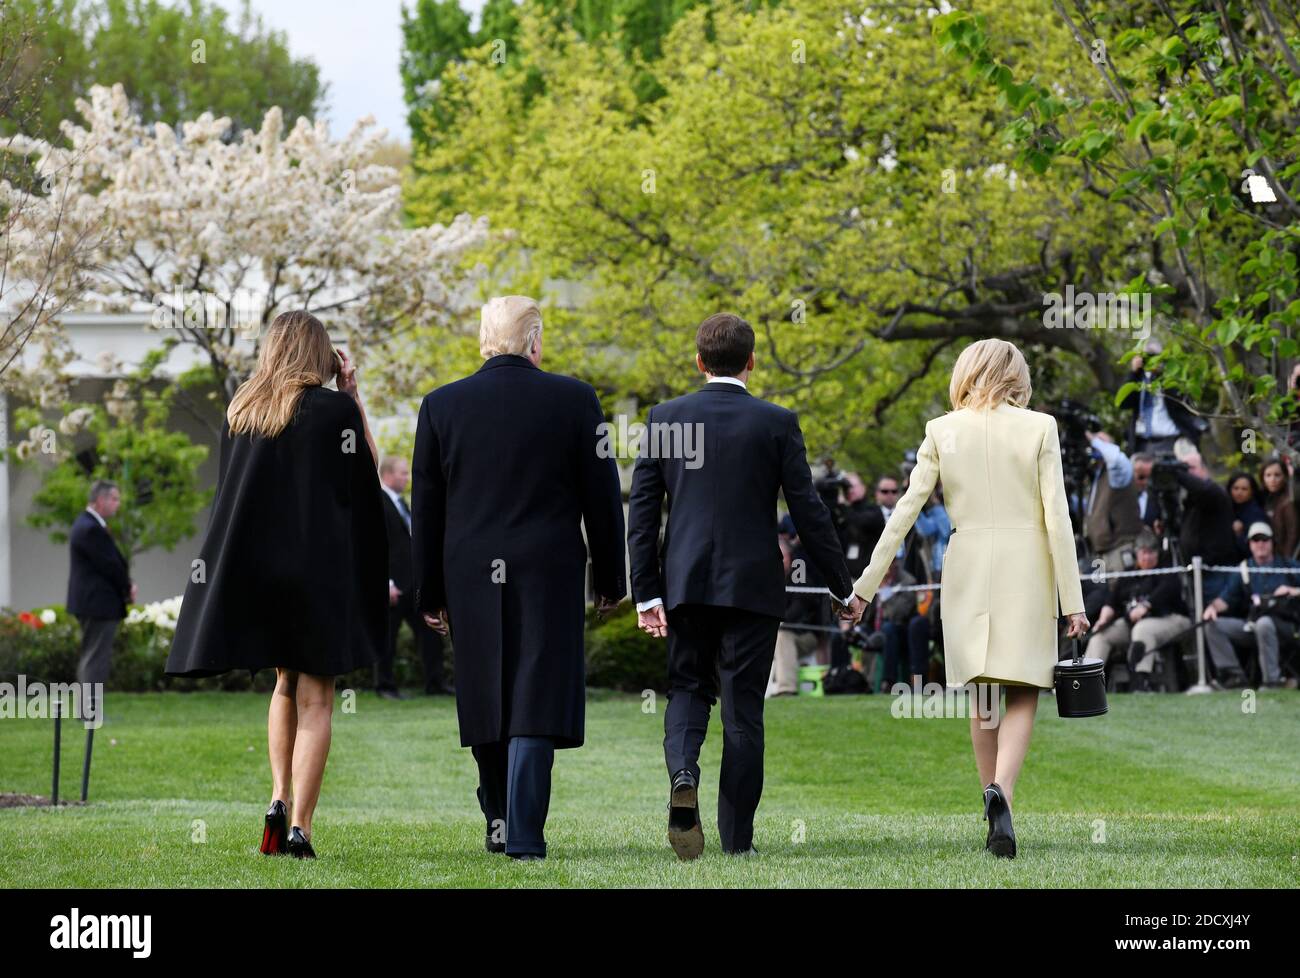 U.S President Donald Trump and First Lady Melania Trump walk with French President Emmanuel Macron and his wife Brigitte Macron on the South Lawn of the White House April 23, 2018 in Washington D.C . Photo by Olivier Douliery/ABACAPPRESS.COM Stock Photo